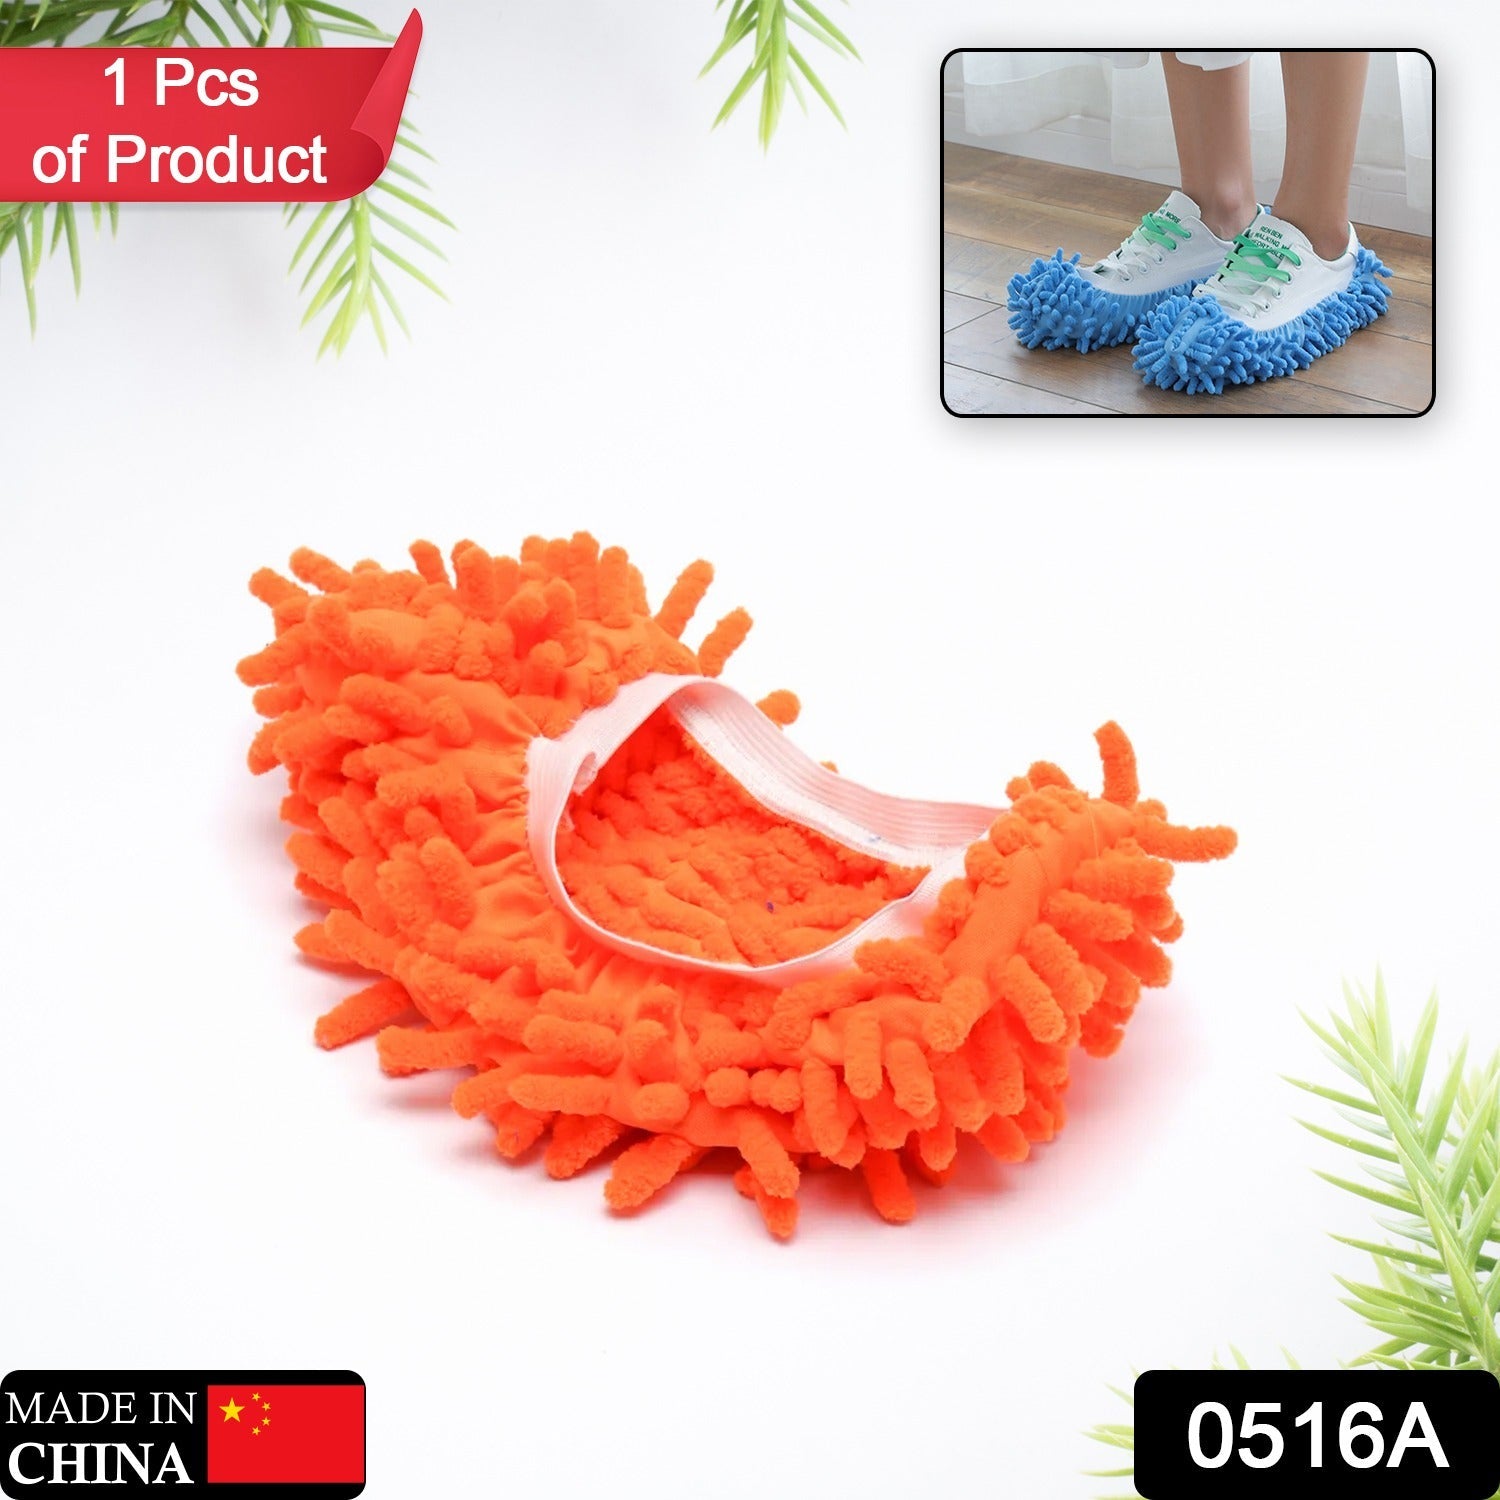 0516a 1Pc Mop Slipper Shoes Cover, Floor Dust Cleaning Household Wiping Mops Head, Floor Cleaning Shoes Cover for House (1 Pc)